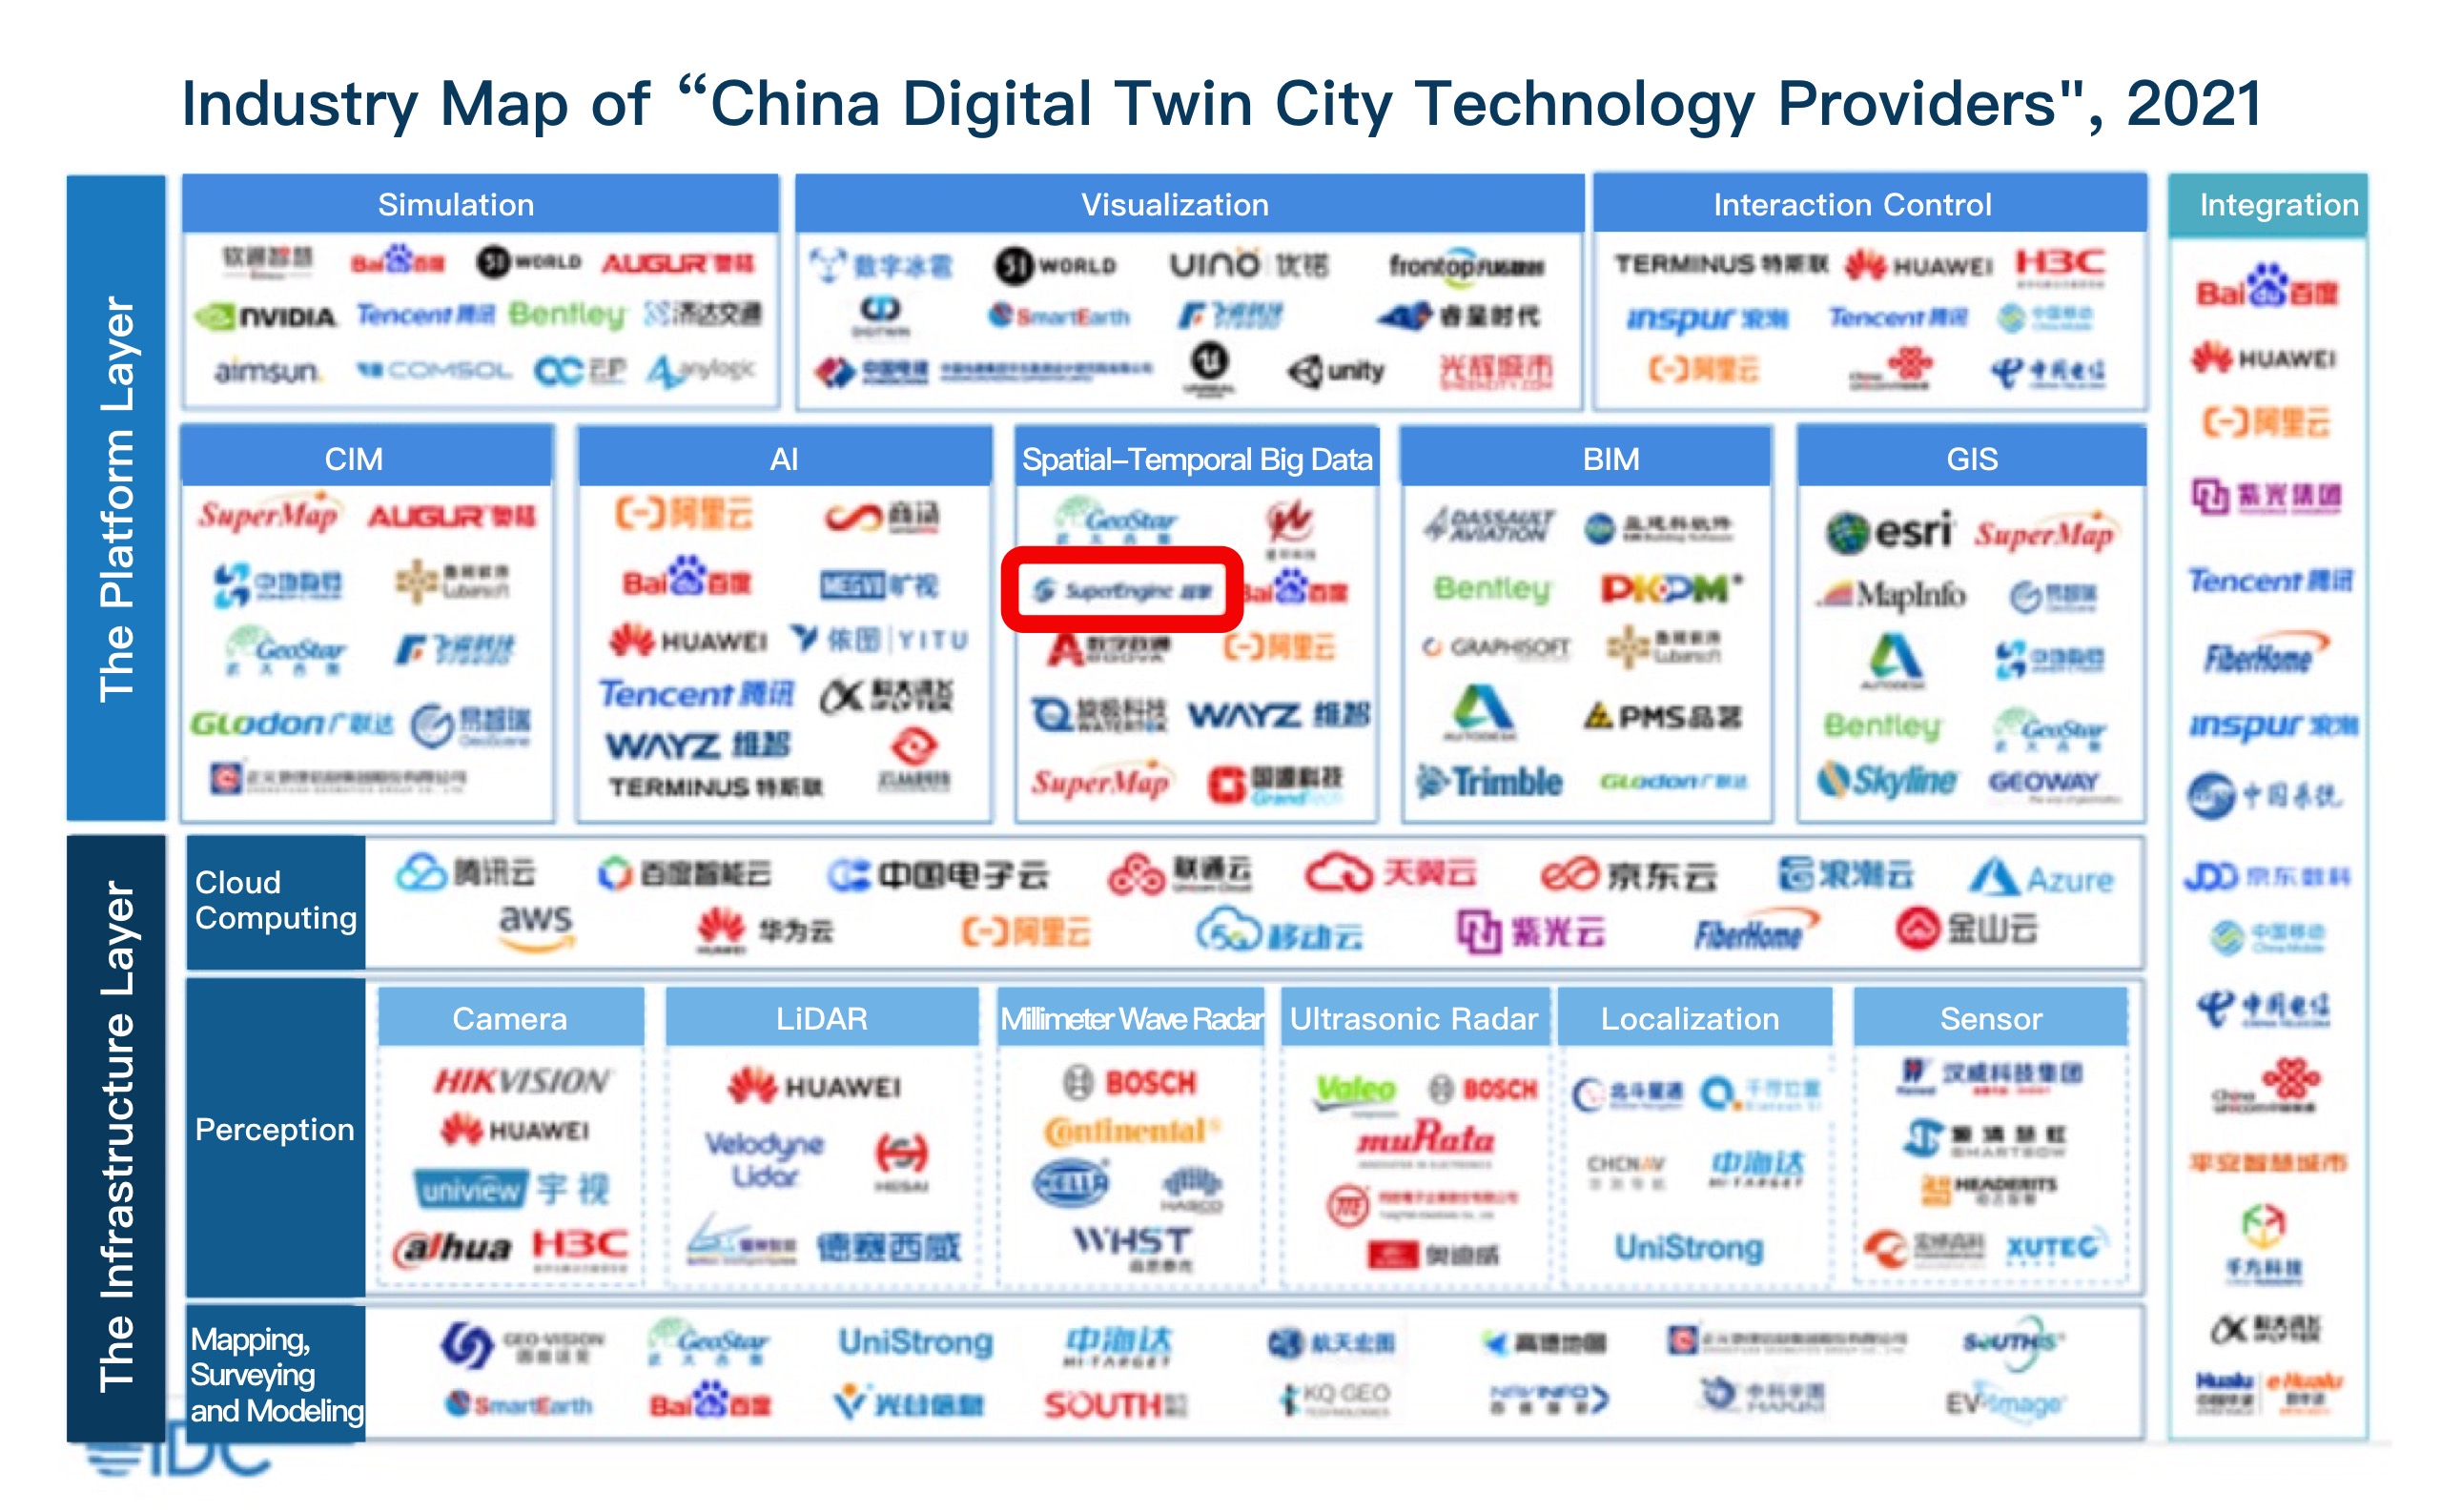 SuperEngine was selected into the China Digital Twin City Technology Providers industry map in IDC report